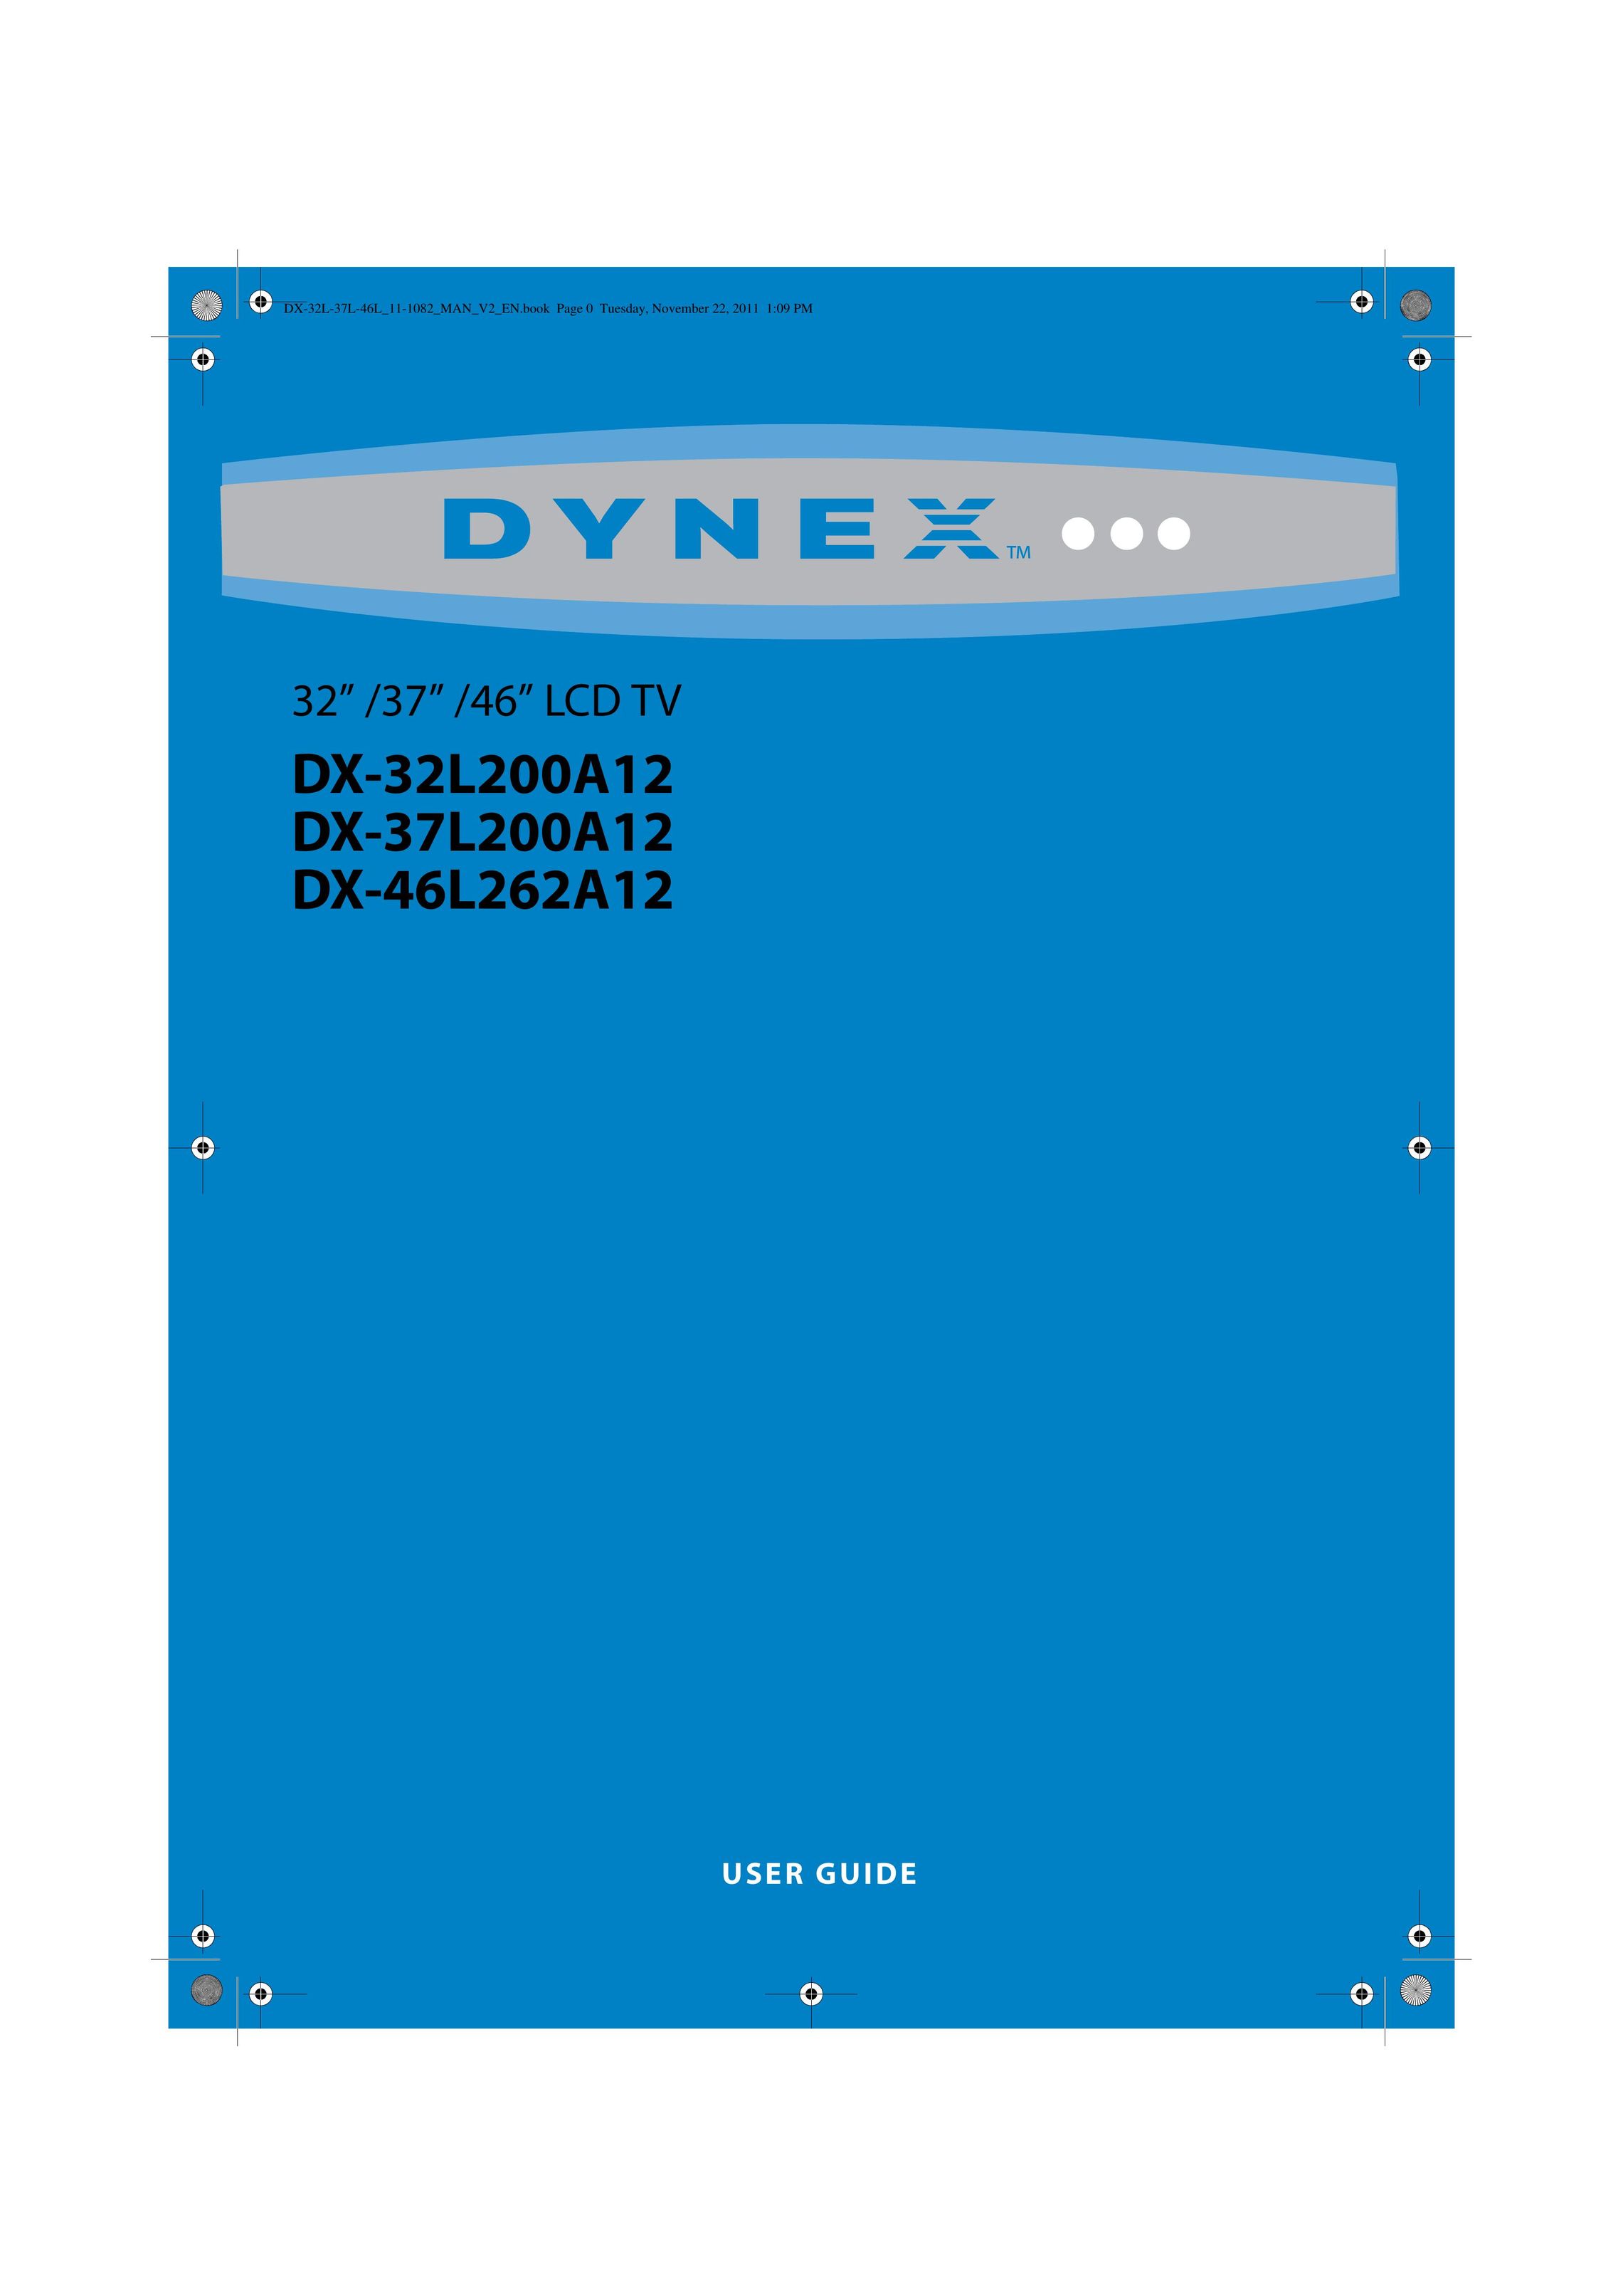 Dynex DX-46L262A12 Home Theater Screen User Manual